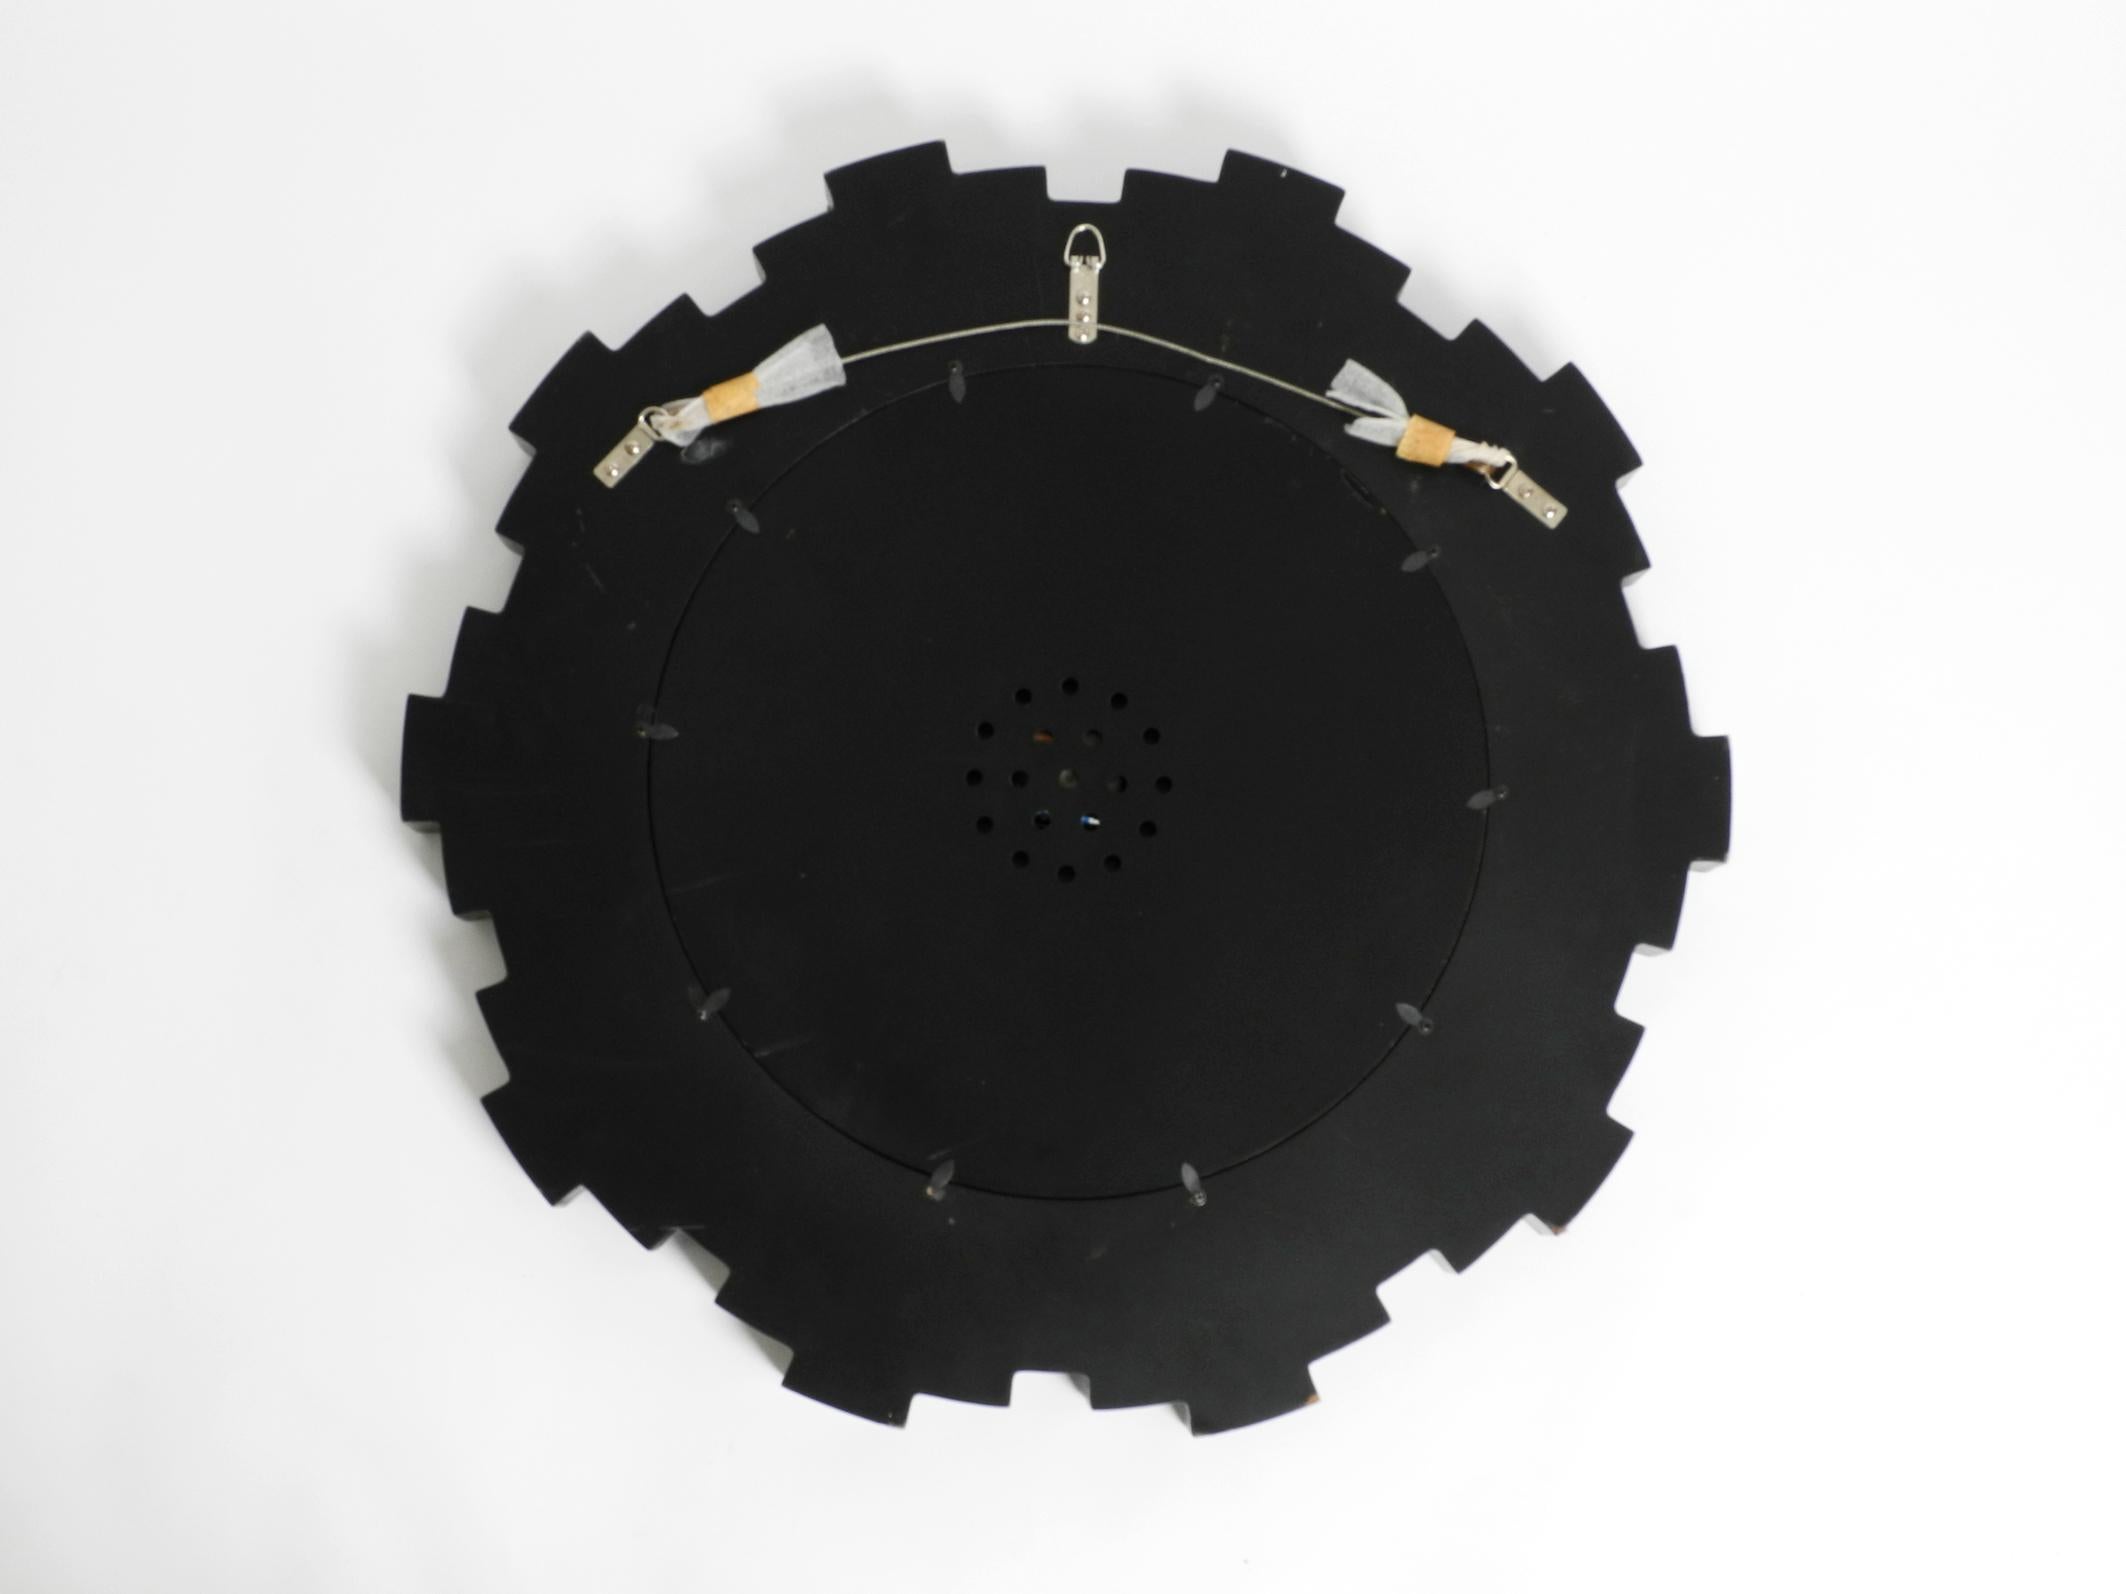 Gigantic Rare Heavy Sunburst Mirror Wall Clock from the 1970s For Sale 1